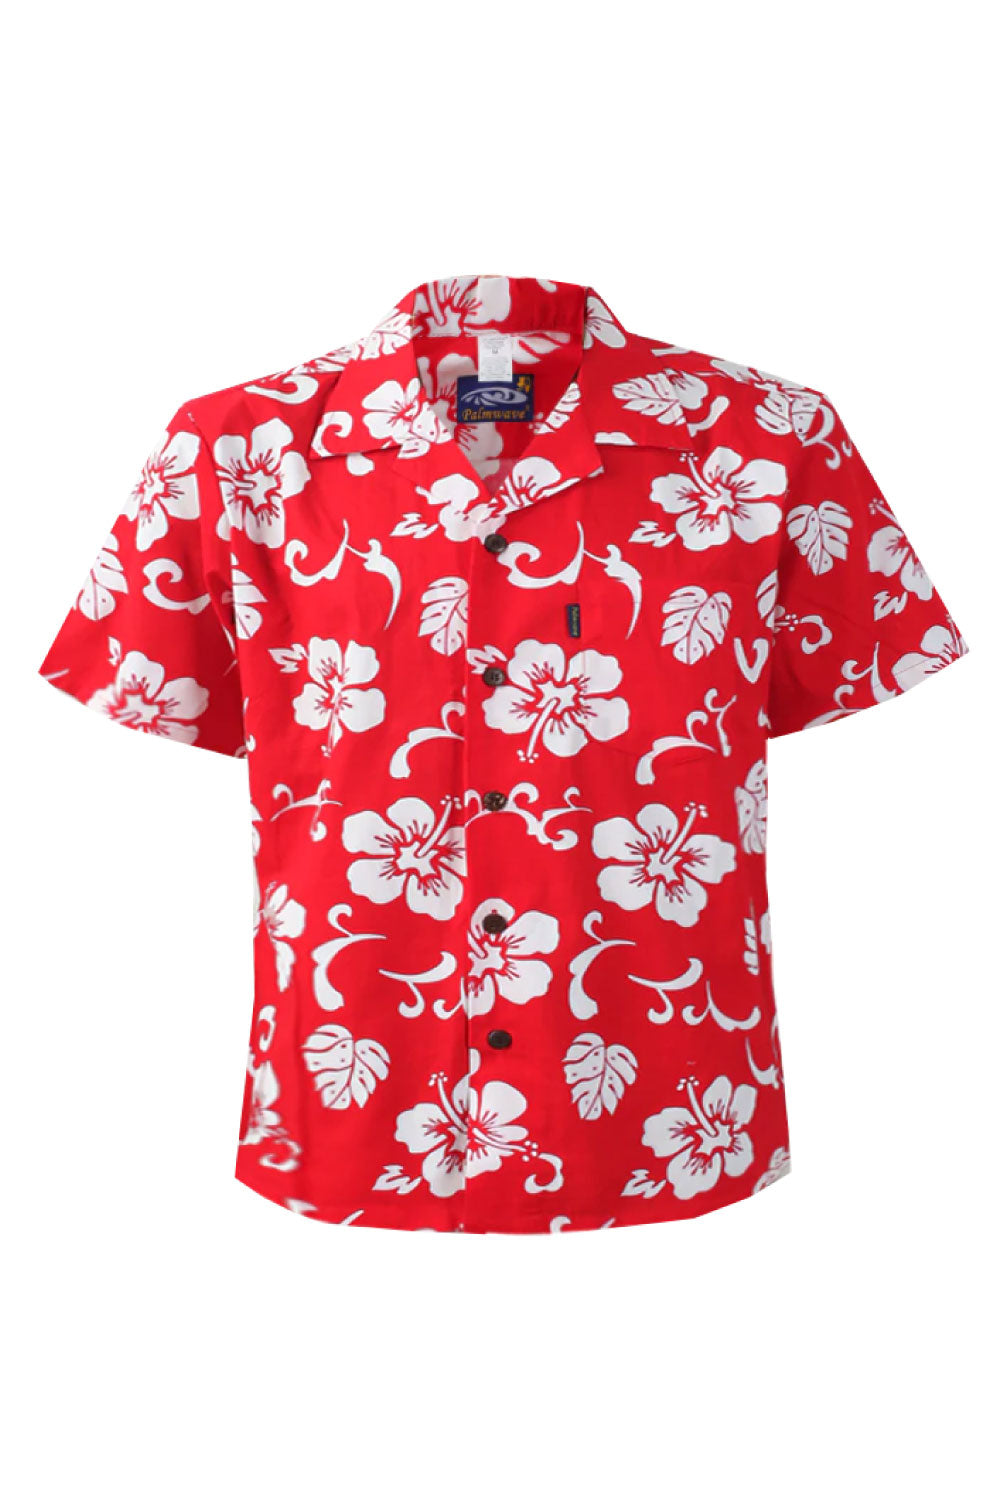 Image of the front of Palmwave's Red Hibiscus Aloha Men's Shirt.